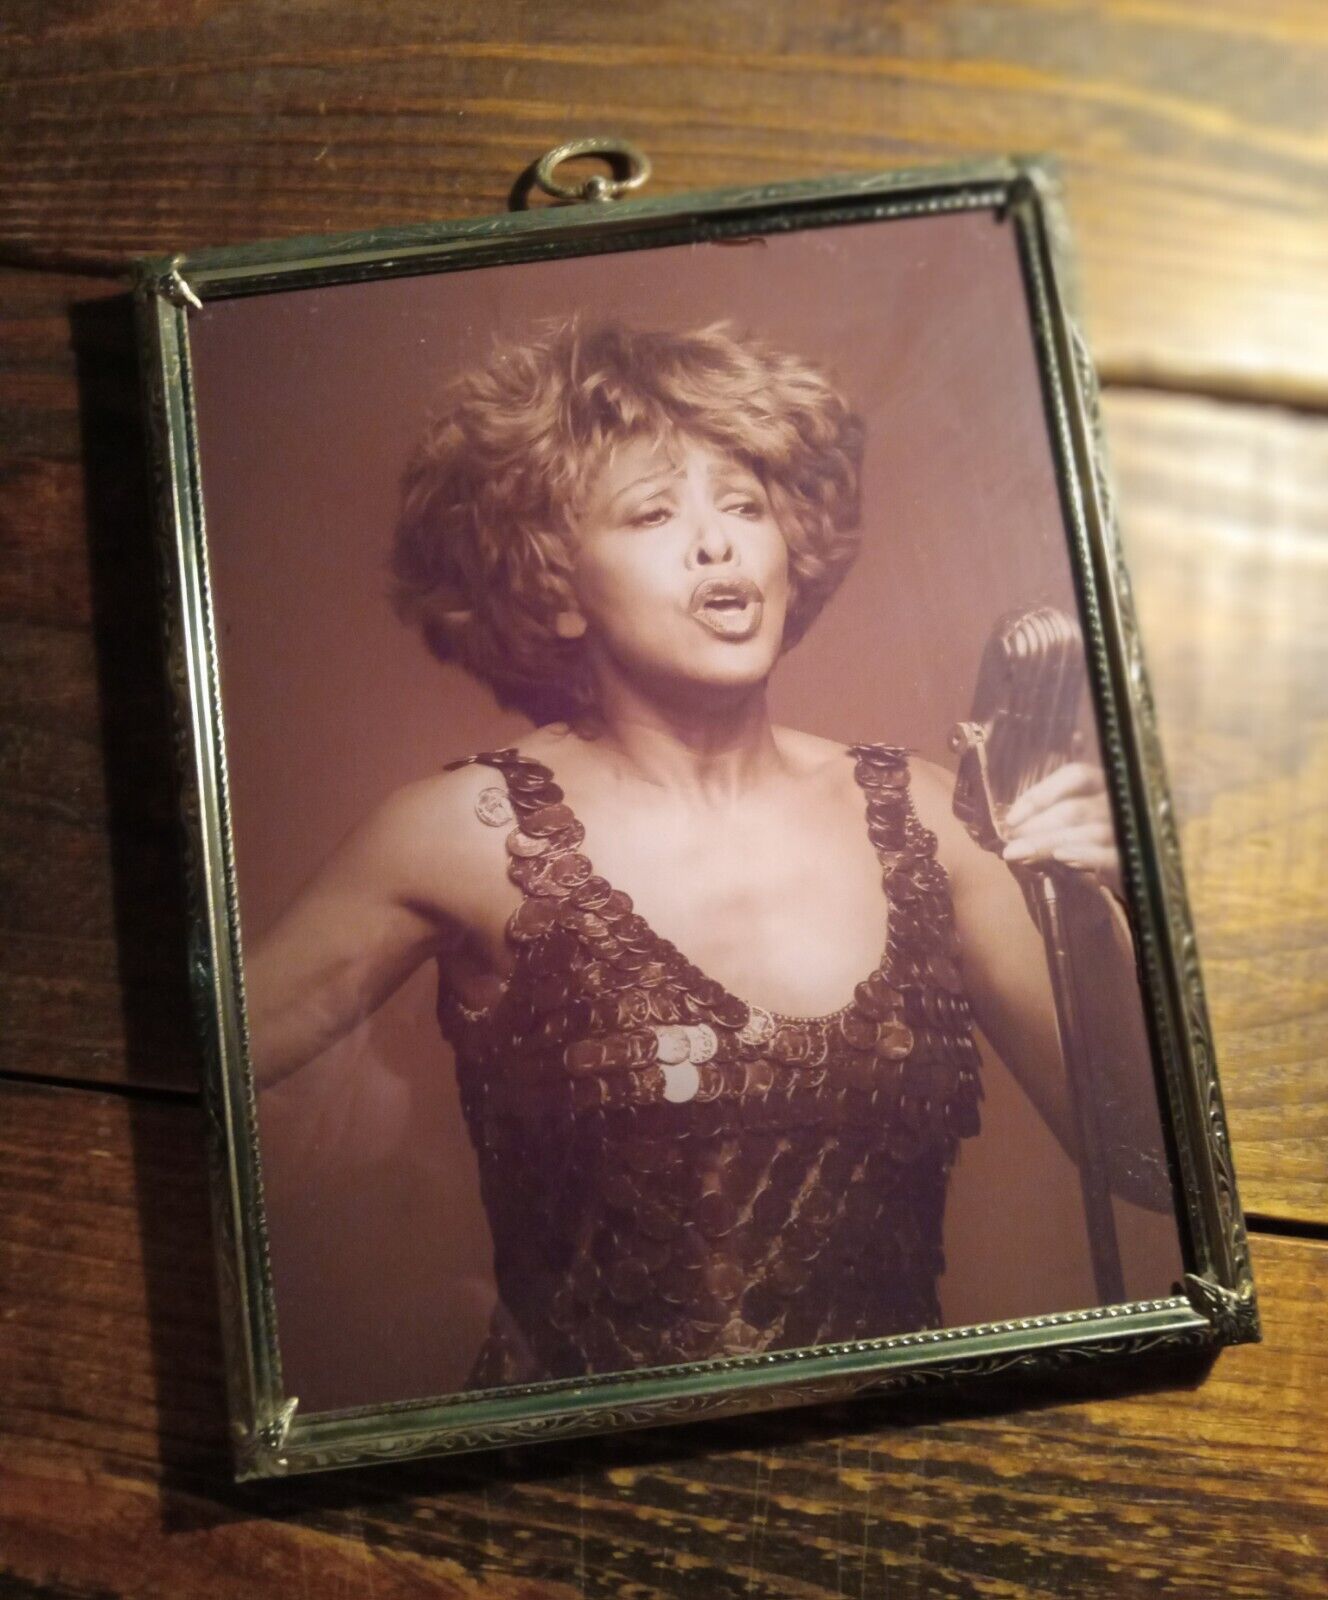 TINA TURNER -- 8 X 10 photo in vintage frame -- You're Simply The BEST 